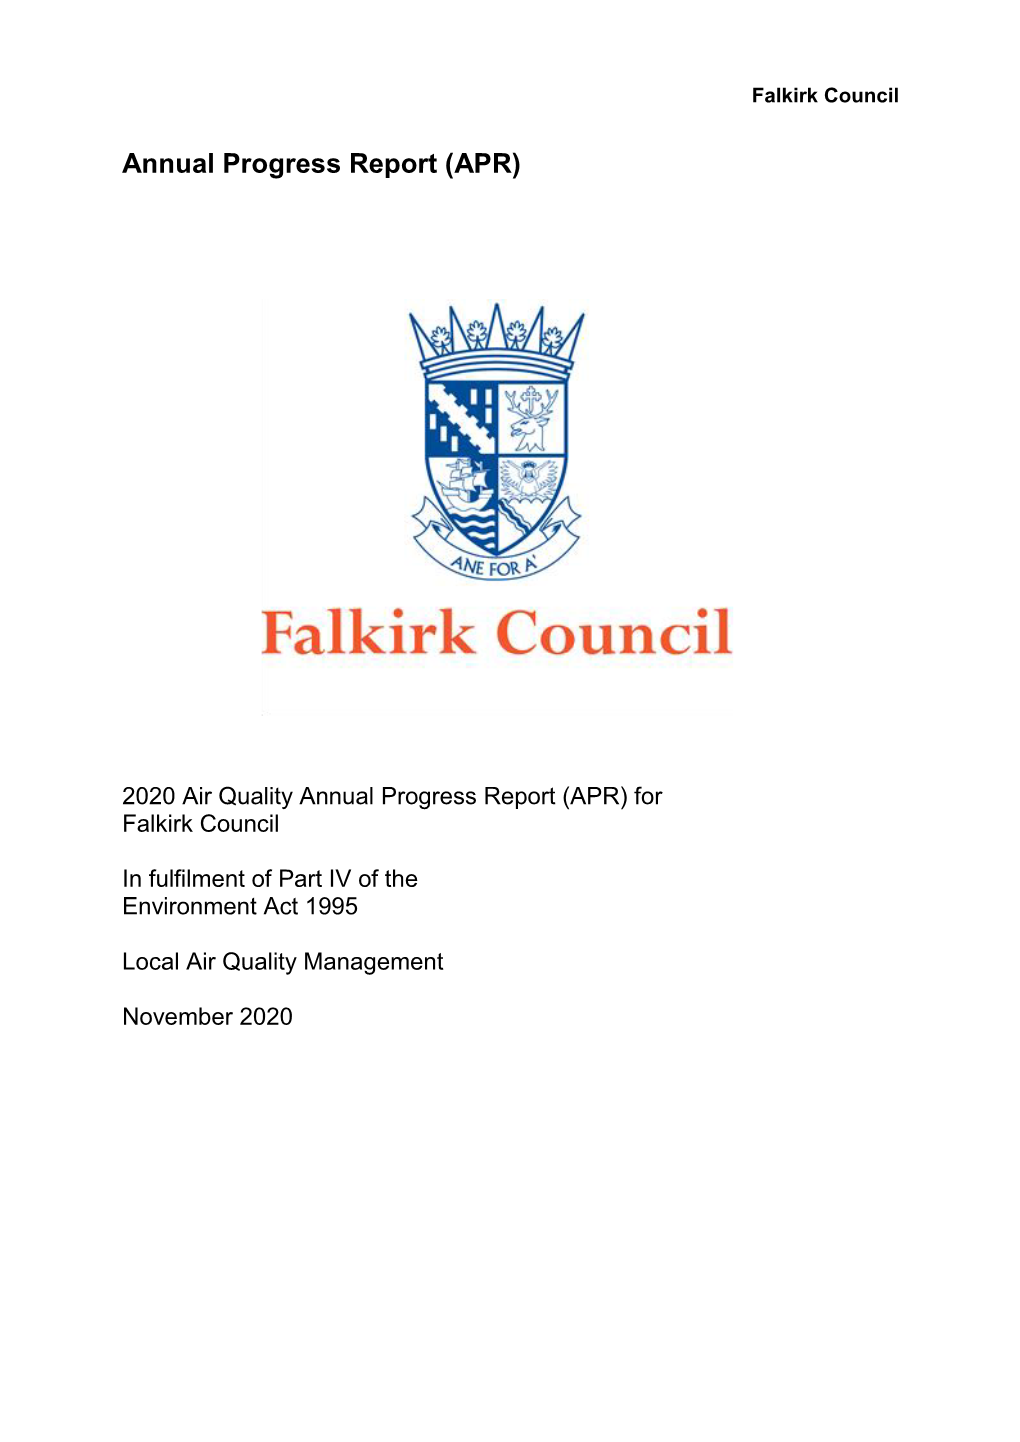 2020 Air Quality Annual Progress Report (APR) for Falkirk Council